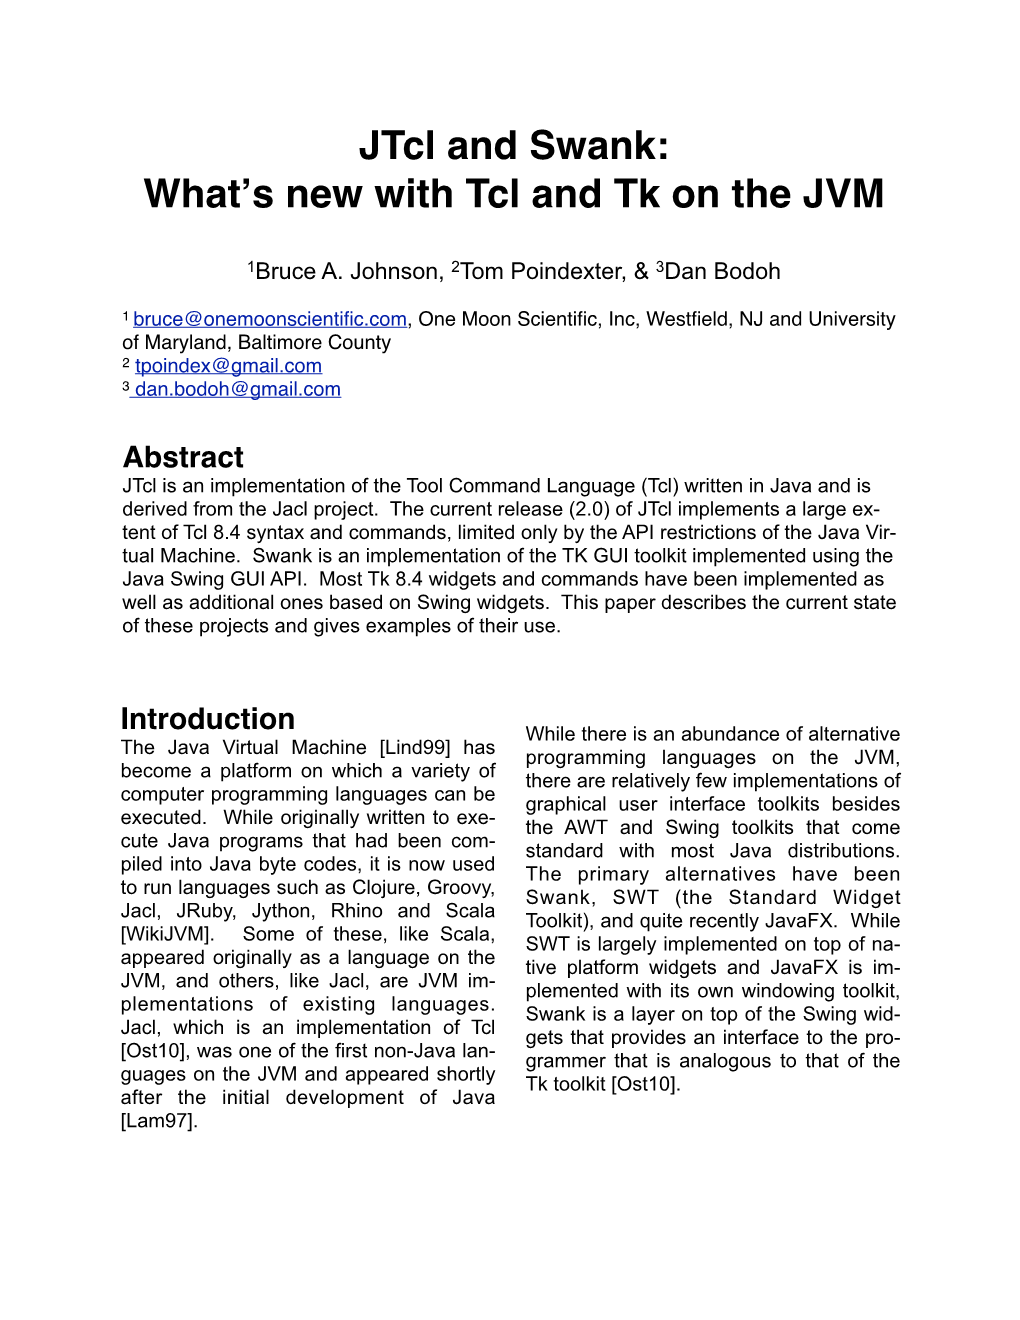 Jtcl and Swank: Whatʼs New with Tcl and Tk on the JVM